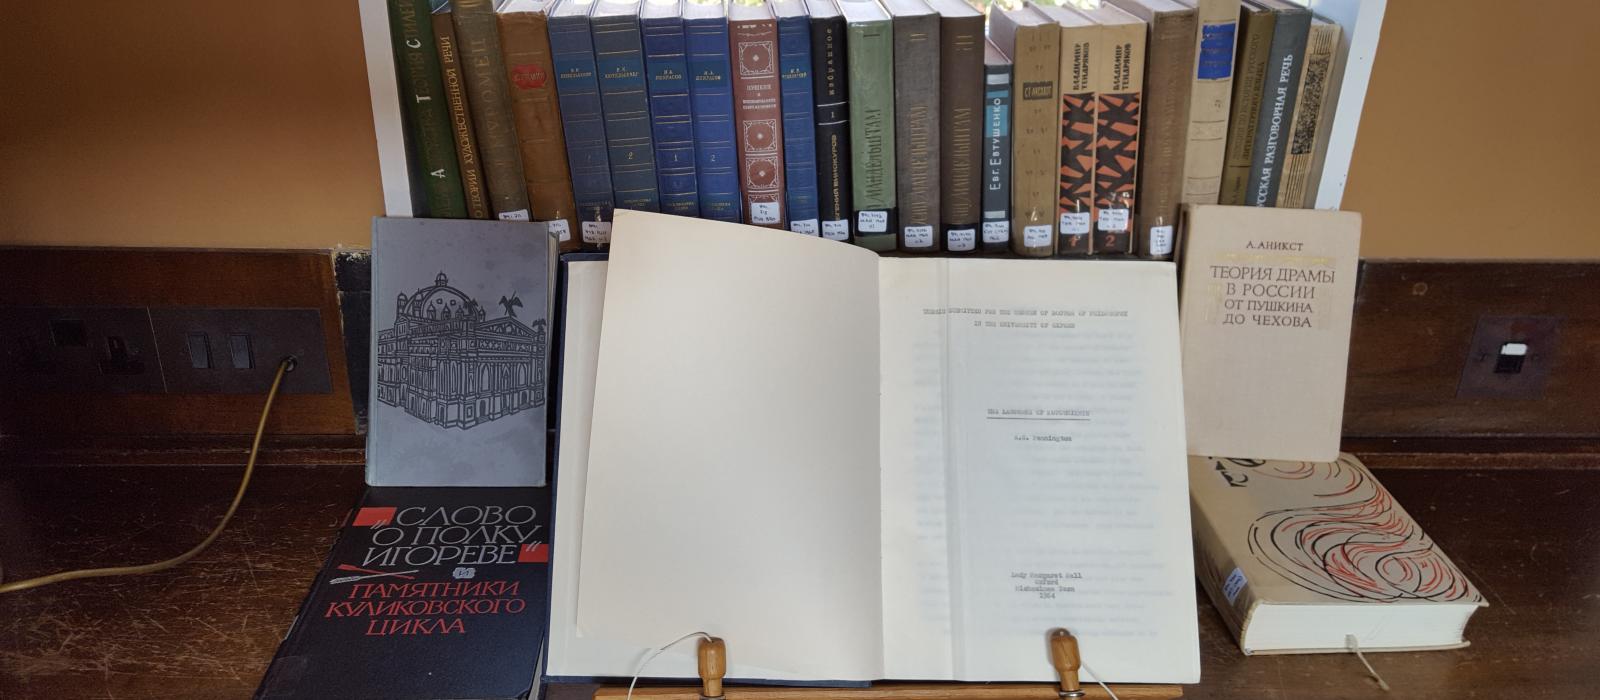 Slavonic book collection at LMH